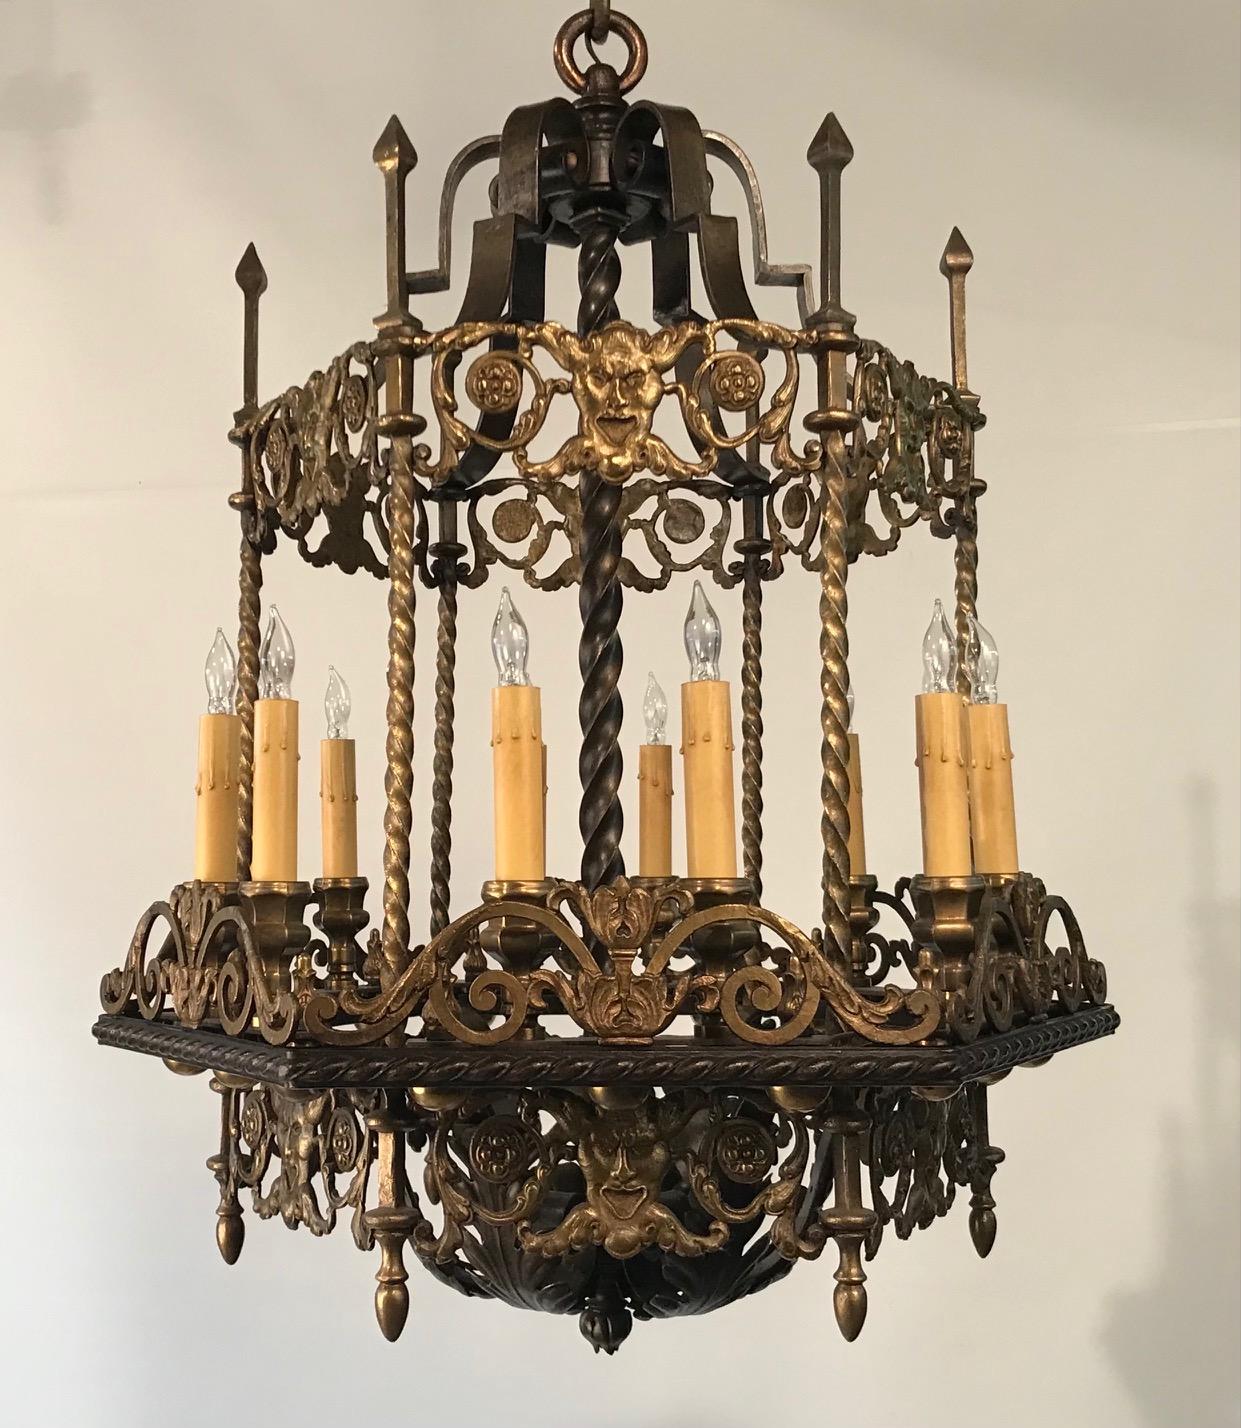 This unusual chandelier is made in this rather rare lantern form but without being enclosed in glazed panels. It is hexagonal, with two lights on each side. The upper section is enclosed by an openwork panel of scrolls and masks, a motif repeated on